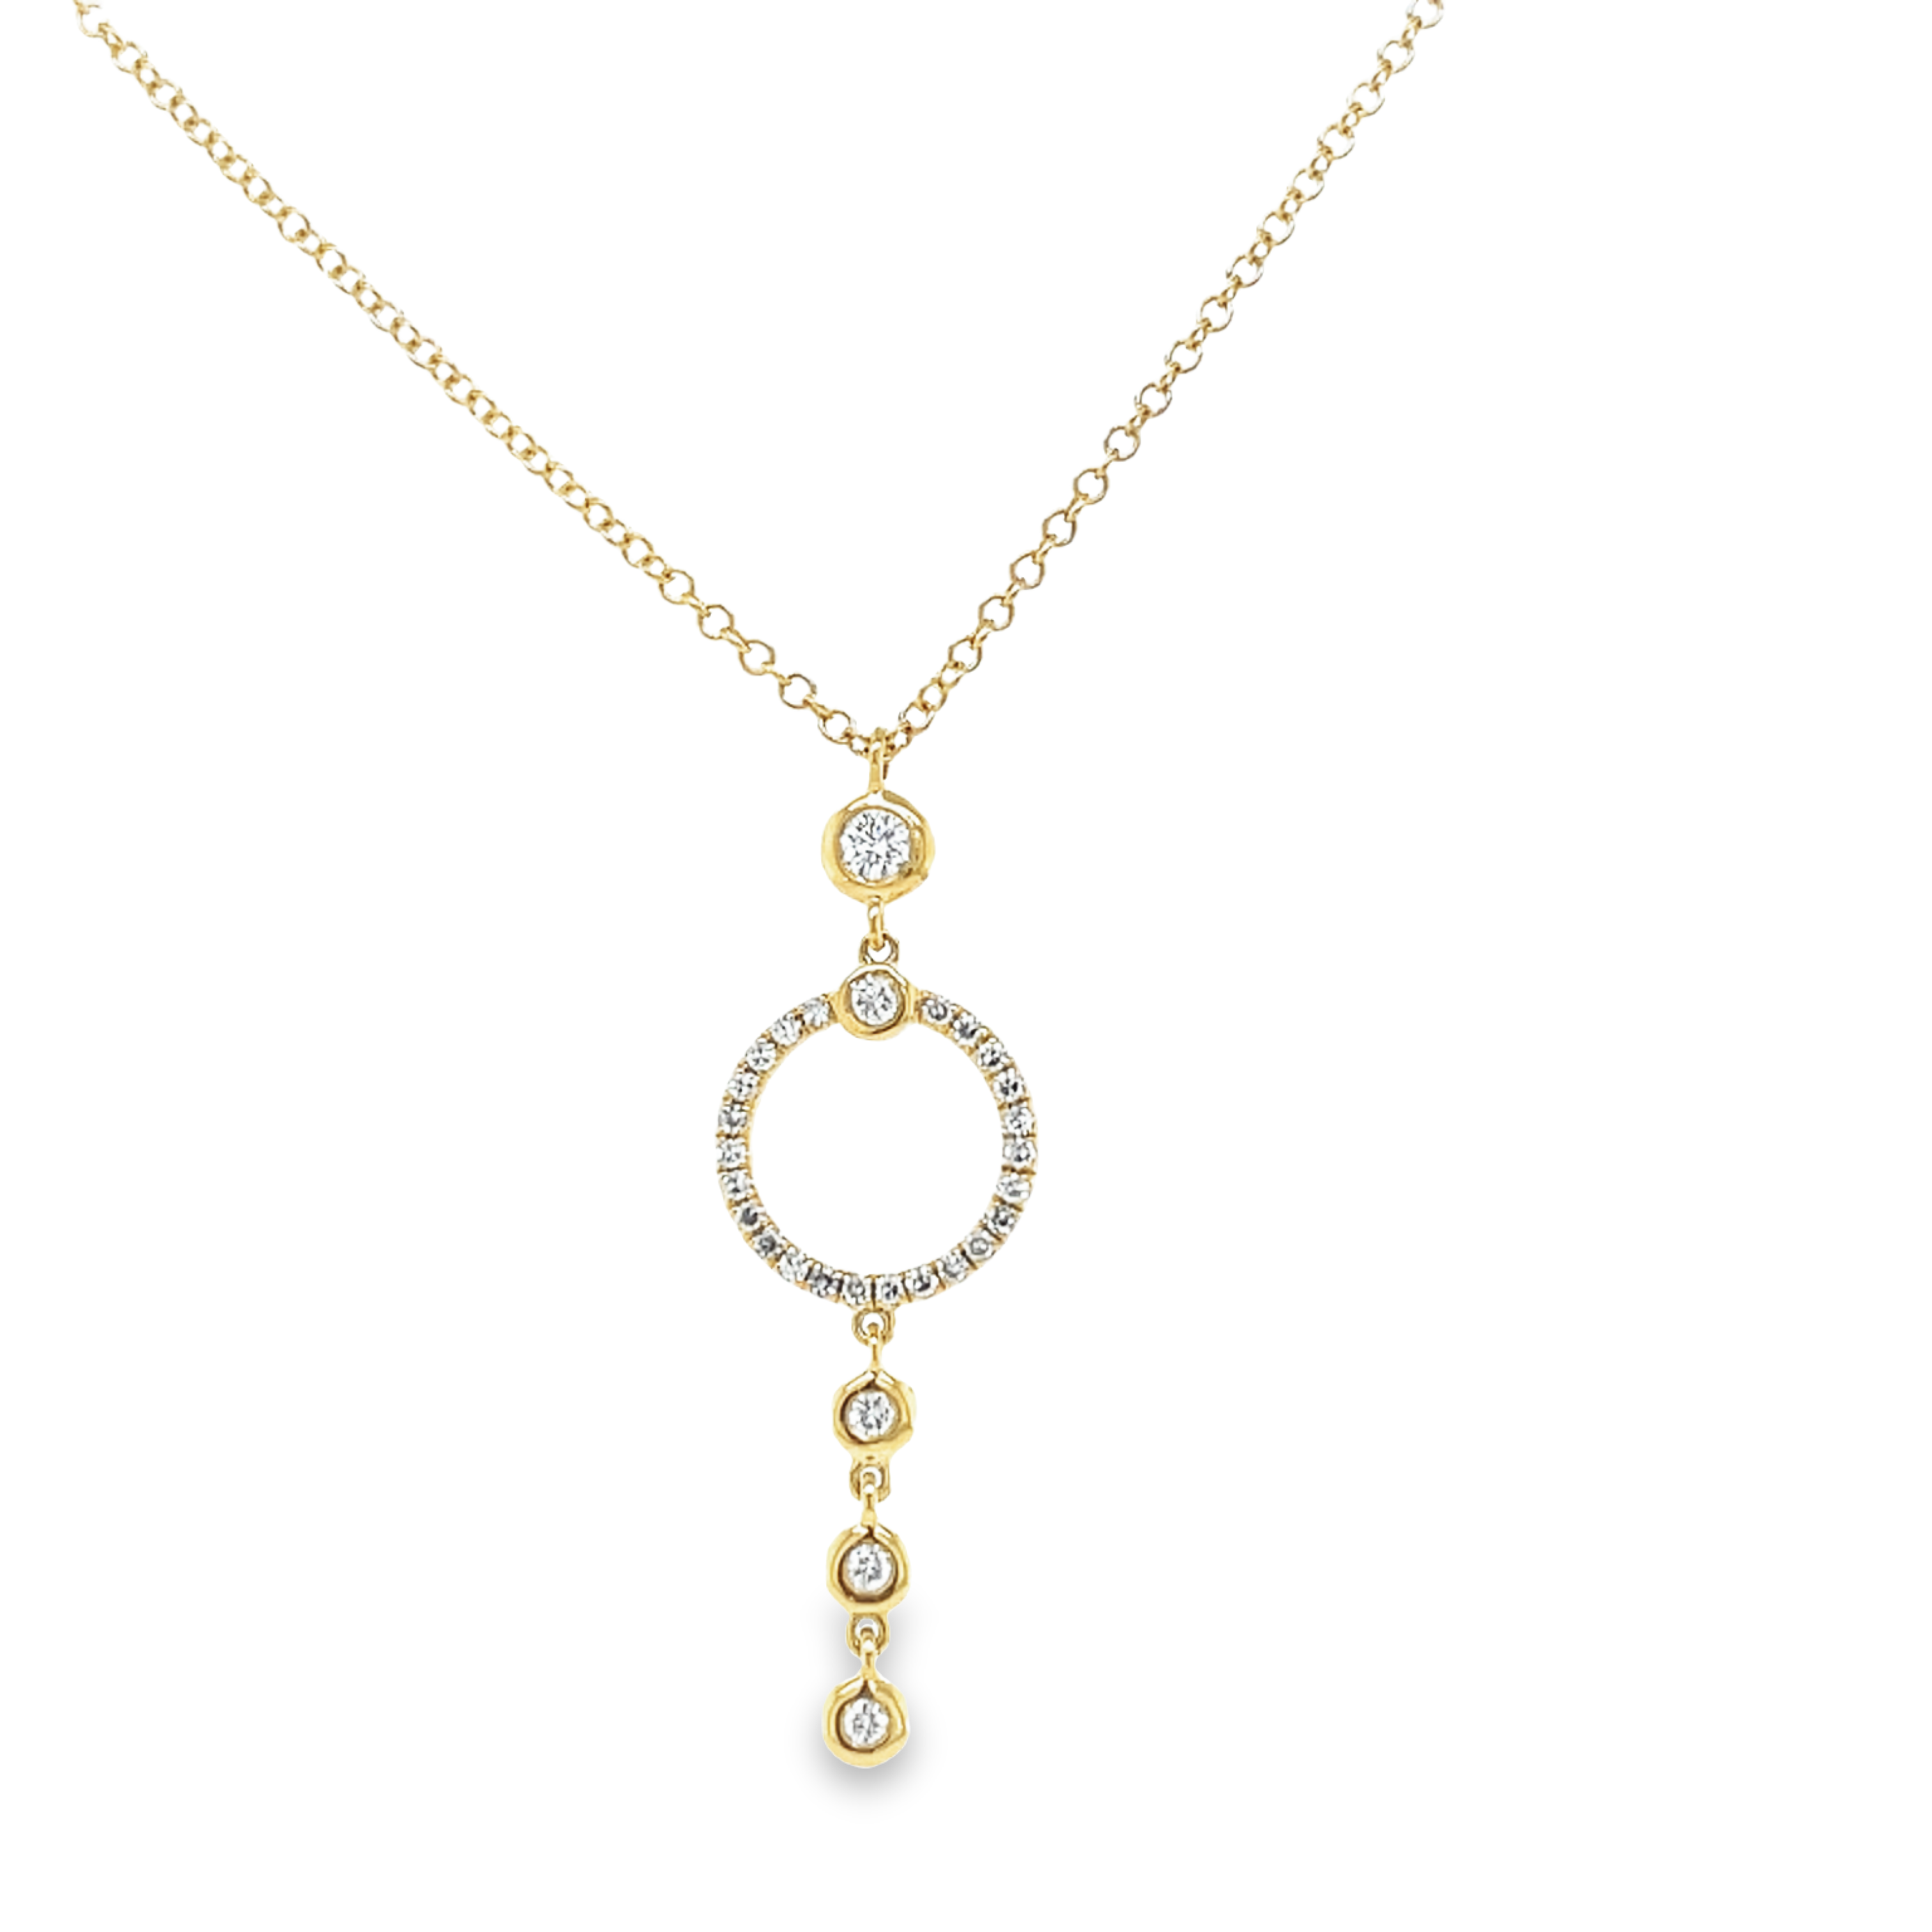 Adorn yourself with a dainty yet dazzling diamond necklace! 0.17 cts of round diamonds set in luxurious 14k yellow gold, connected by a secure lobster clasp and 1.5" long diamond circle, this stunning piece hangs 18" long with two sizable loops.